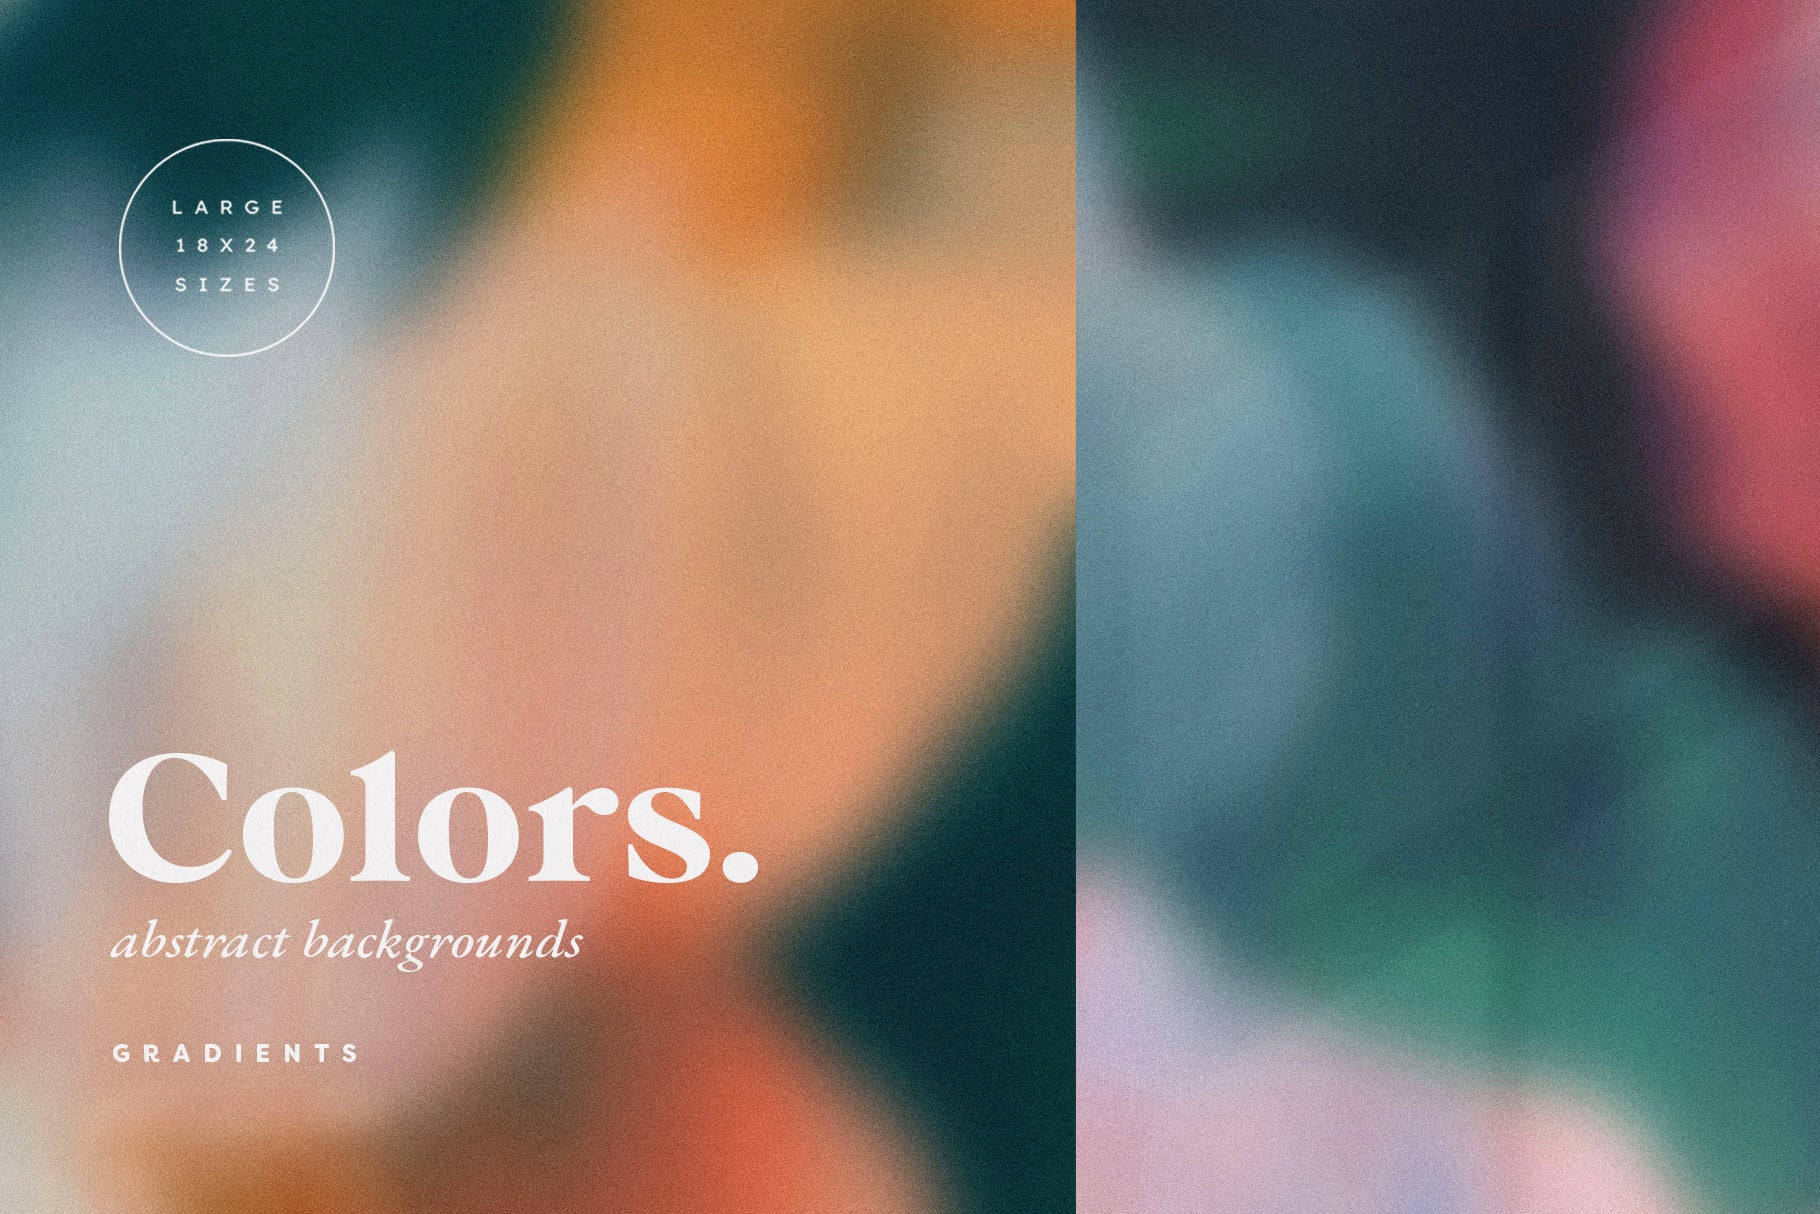 colorful gradient background